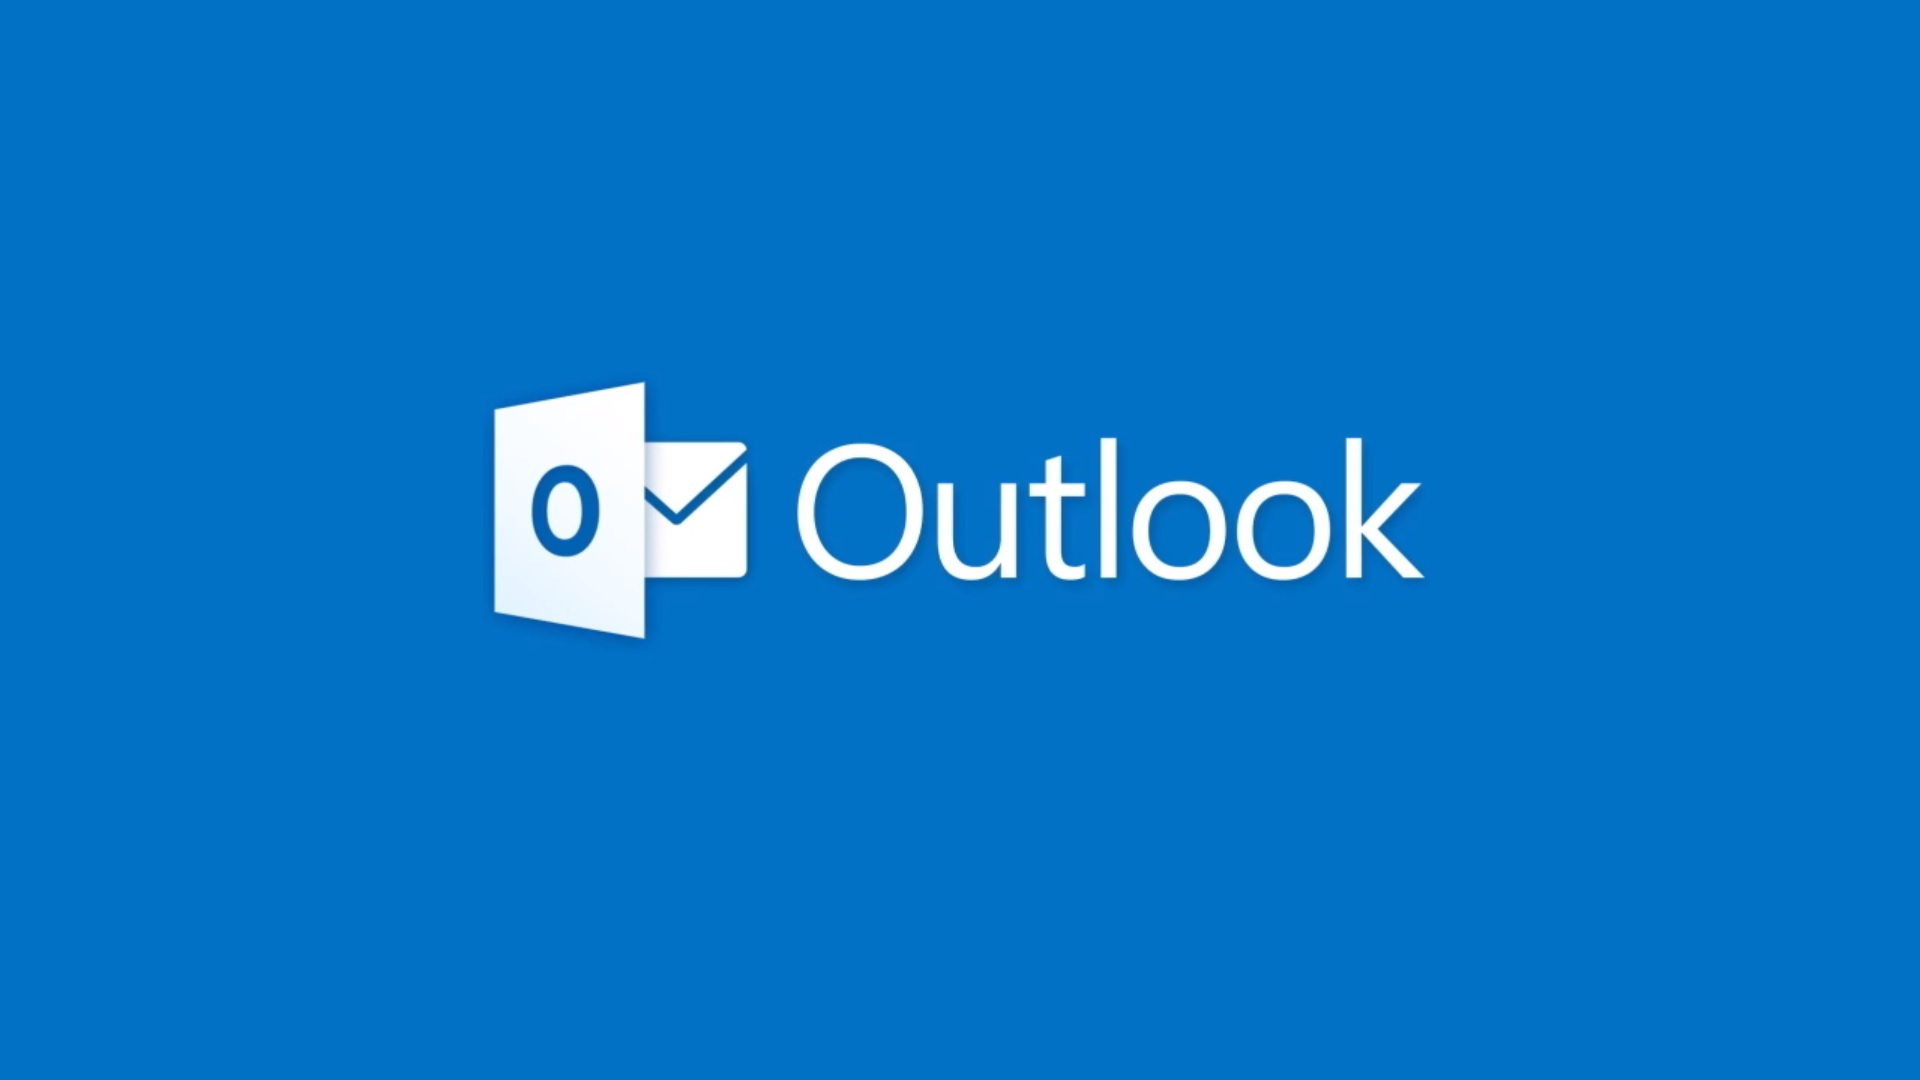 WHAT DO I DO IF MY OUTLOOK WON'T OPEN?